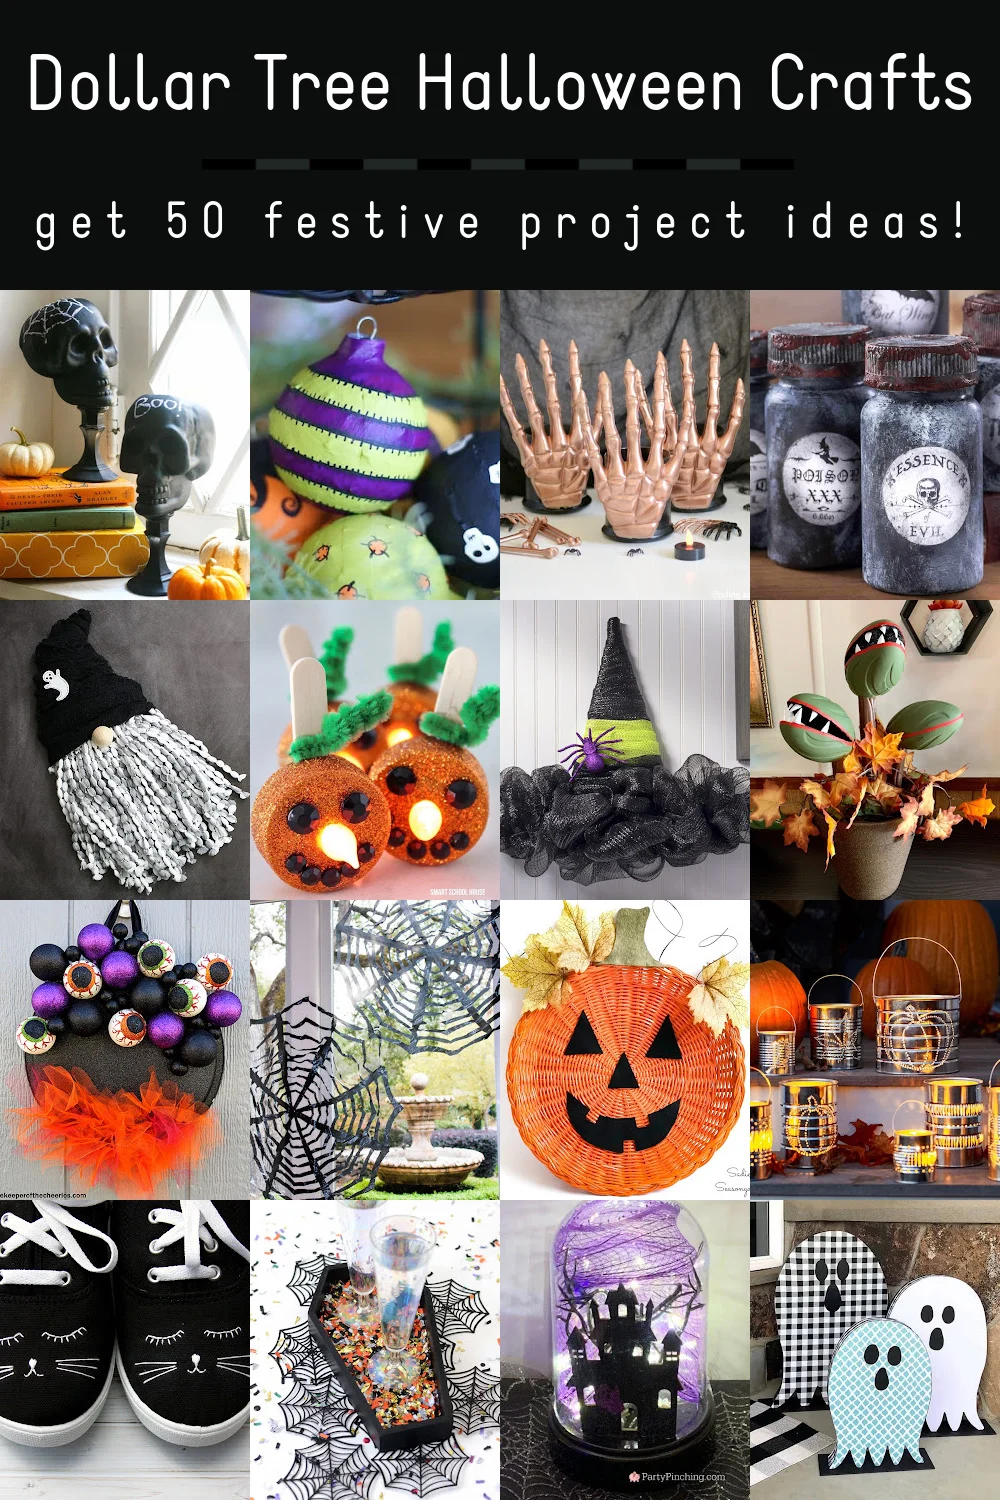 Dollar Tree Halloween Crafts You'Ll Have To Try - Mod Podge Rocks